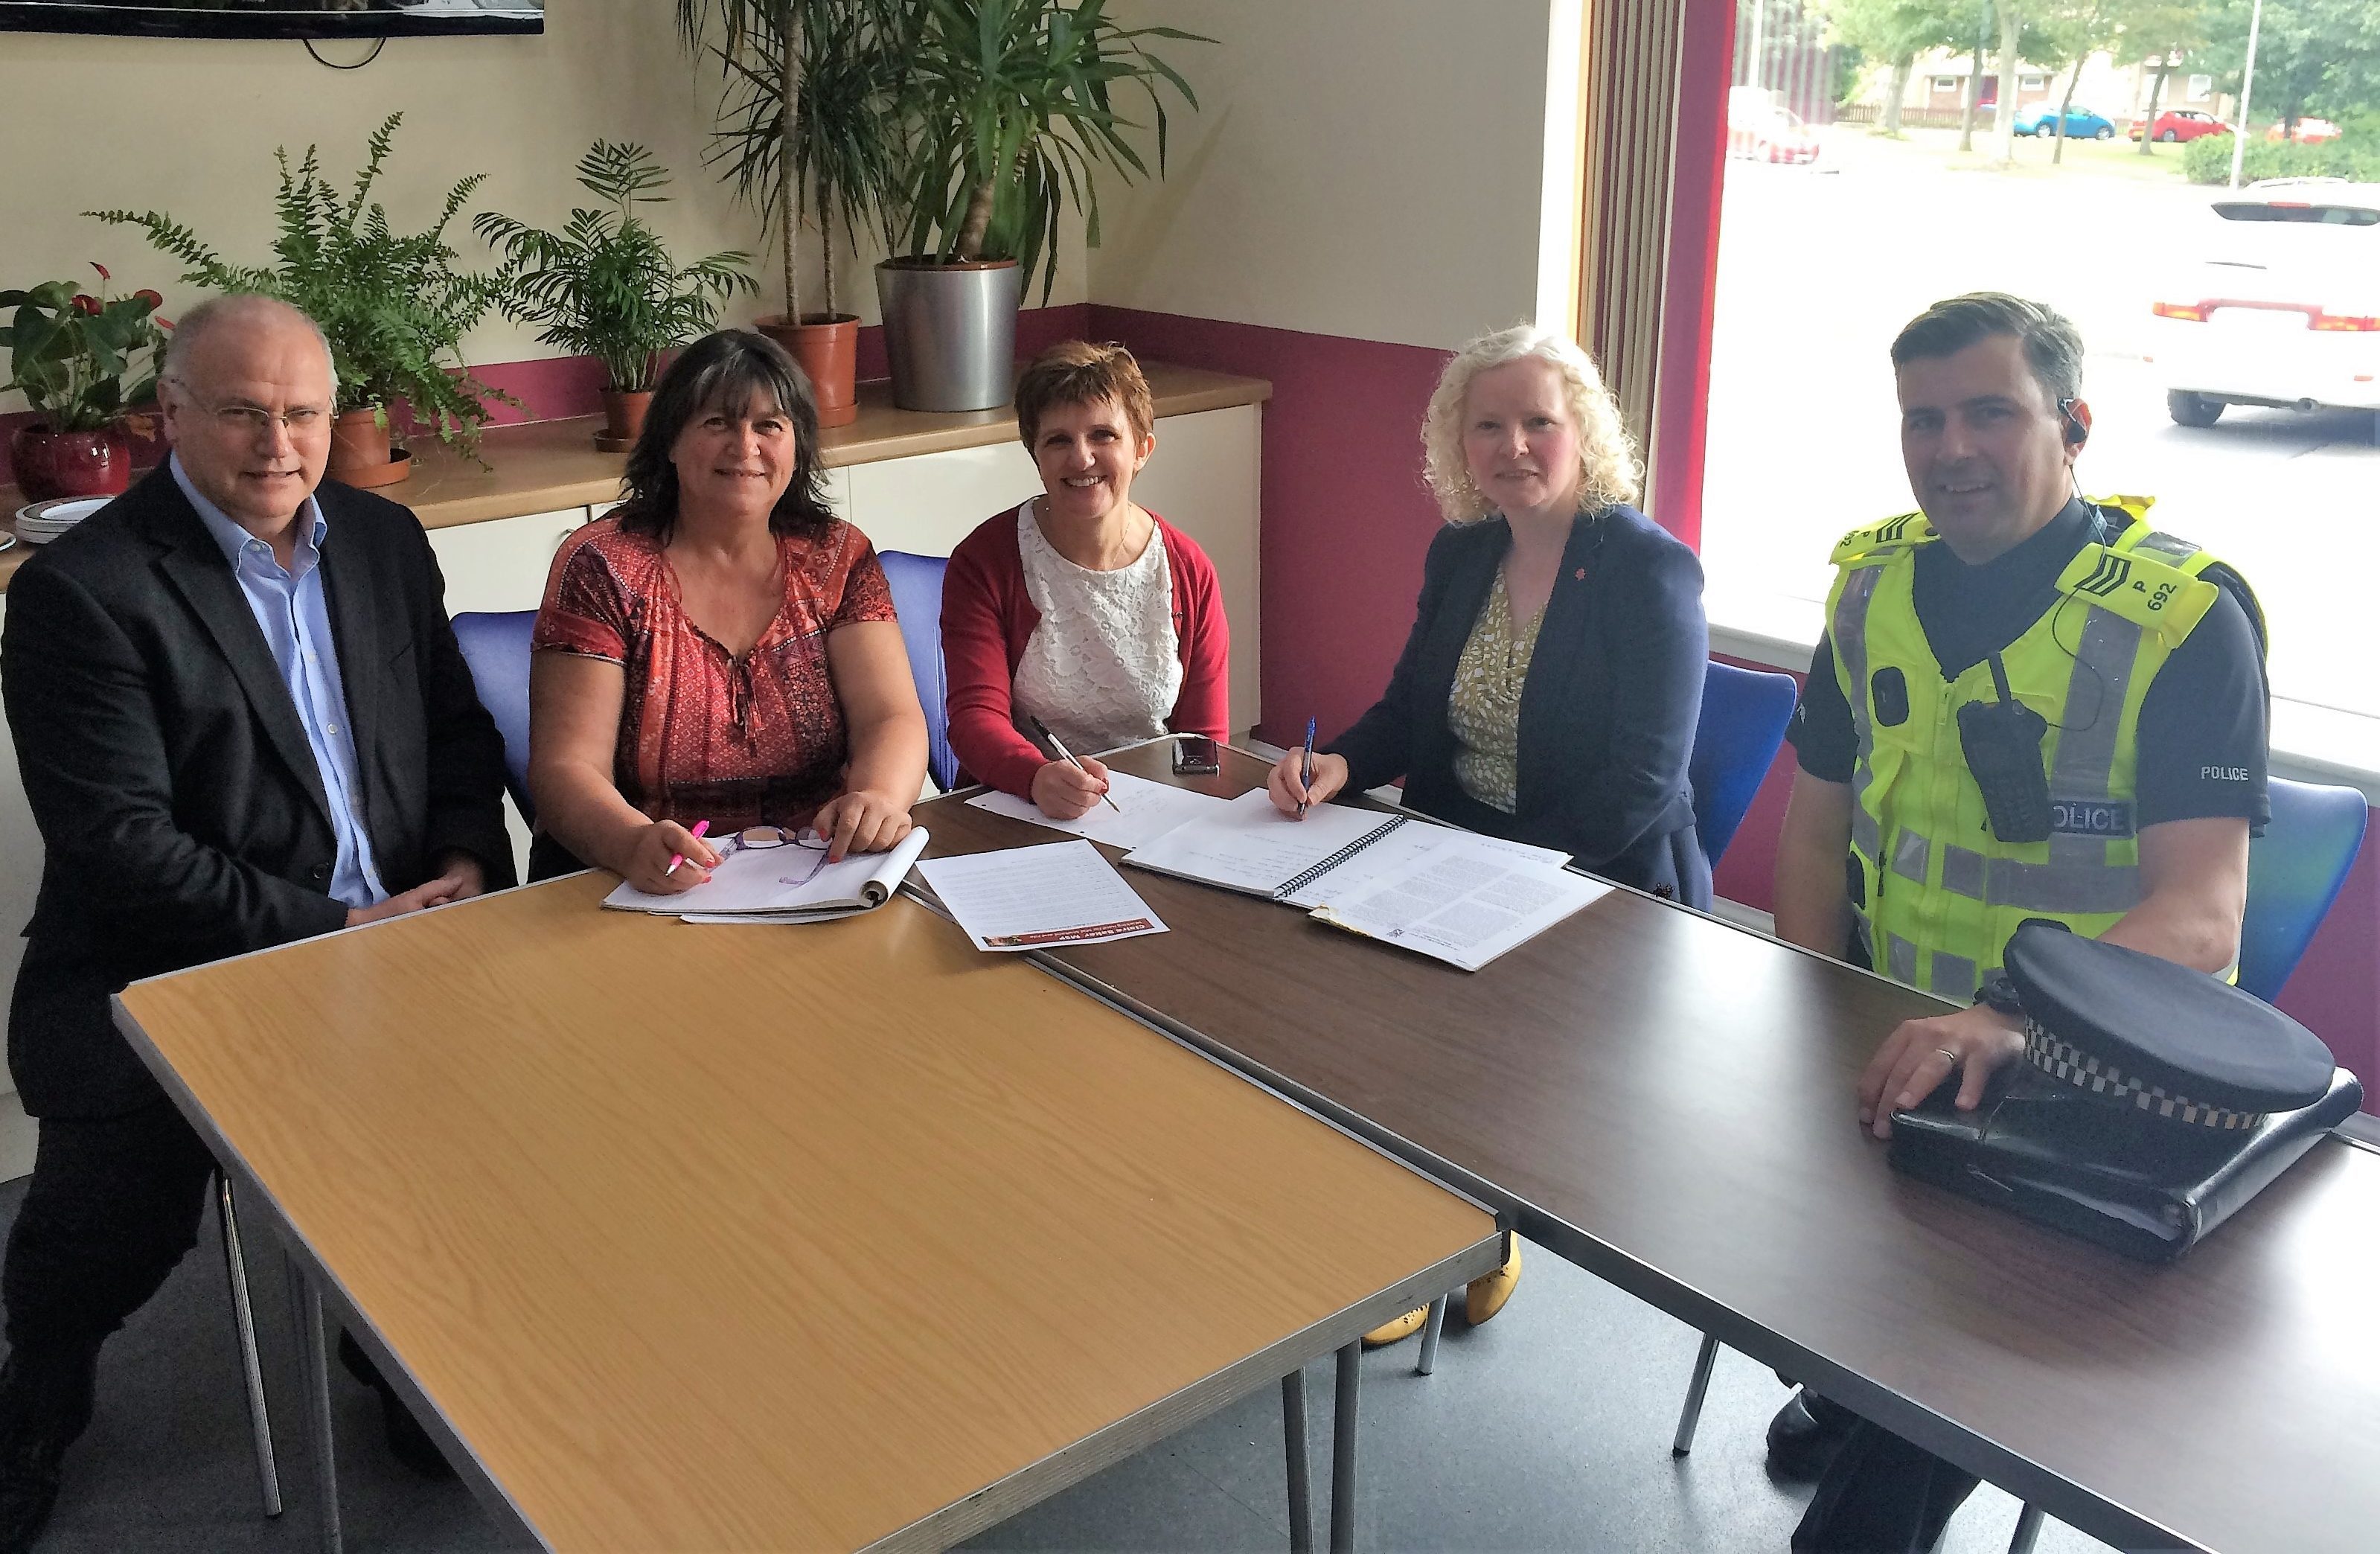 Claire Baker MSP holds round table discussion over the growing menace of quad bikes being driven where they are illegal.
Claire is pictured second right along with council leader David Ross on the left, Councillor Judy Hamilton and Sergeant Jimmy Adamson on far right.